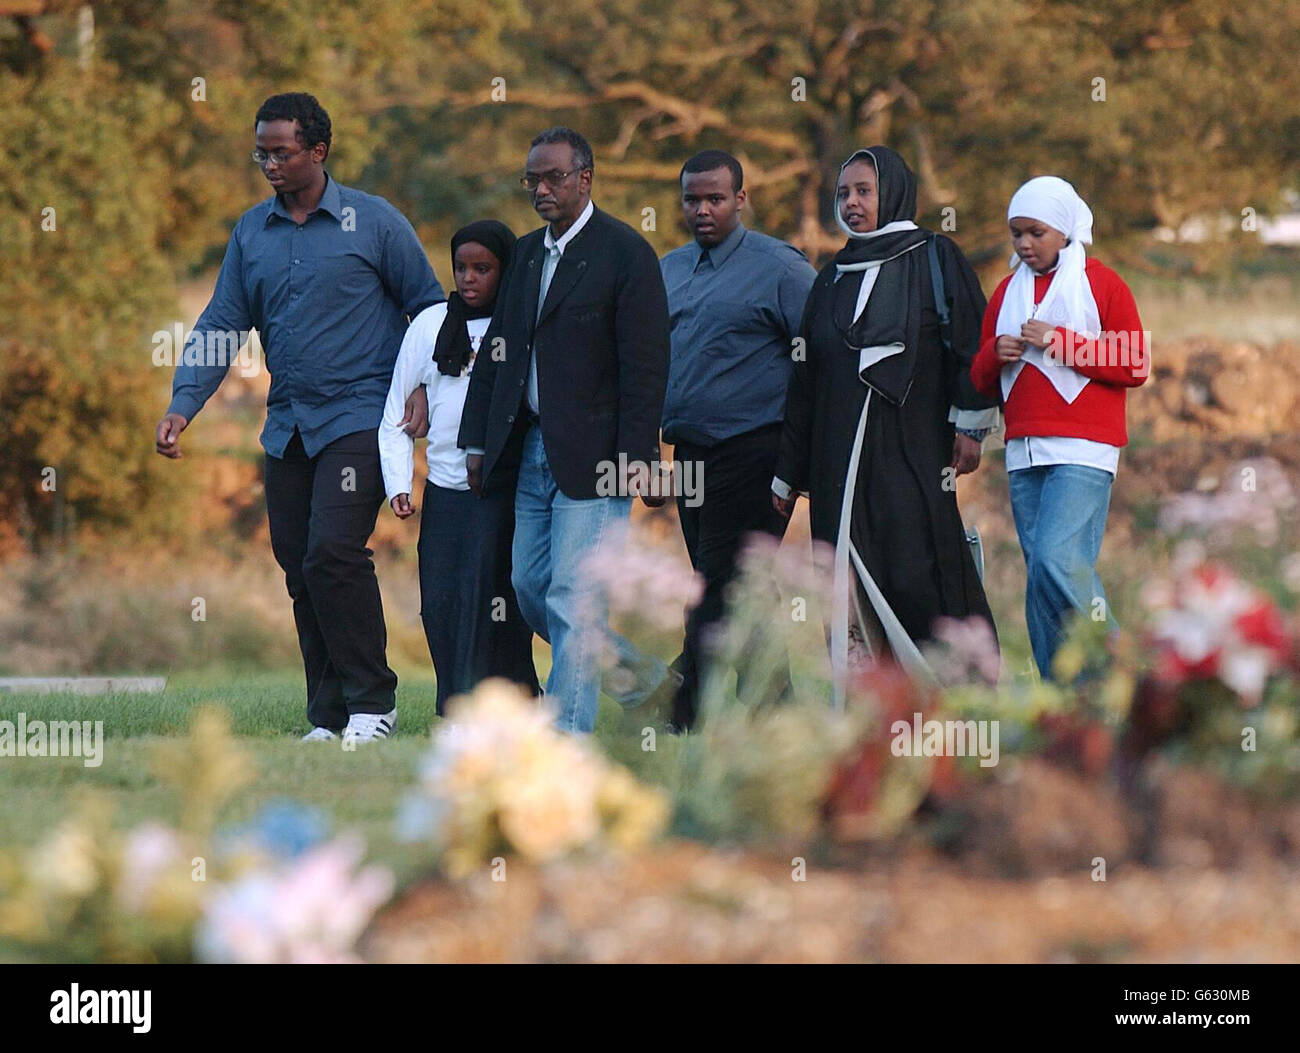 The Osman family - from left: brother Awil, sister Sagal, father Abdul, brqther Bashir, mother Marian and sister Sarah - at the graveside in Watford of 15-year-old Kaiser Osman. * 24/09/02 A 12-year-old boy was cleared, of murdering Kaiser following a three-week trial at the Old Bailey. A 15-year-old, who was 14 when he stabbed the Somali refugee, was cleared of murder but found guilty of manslaughter. Stock Photo